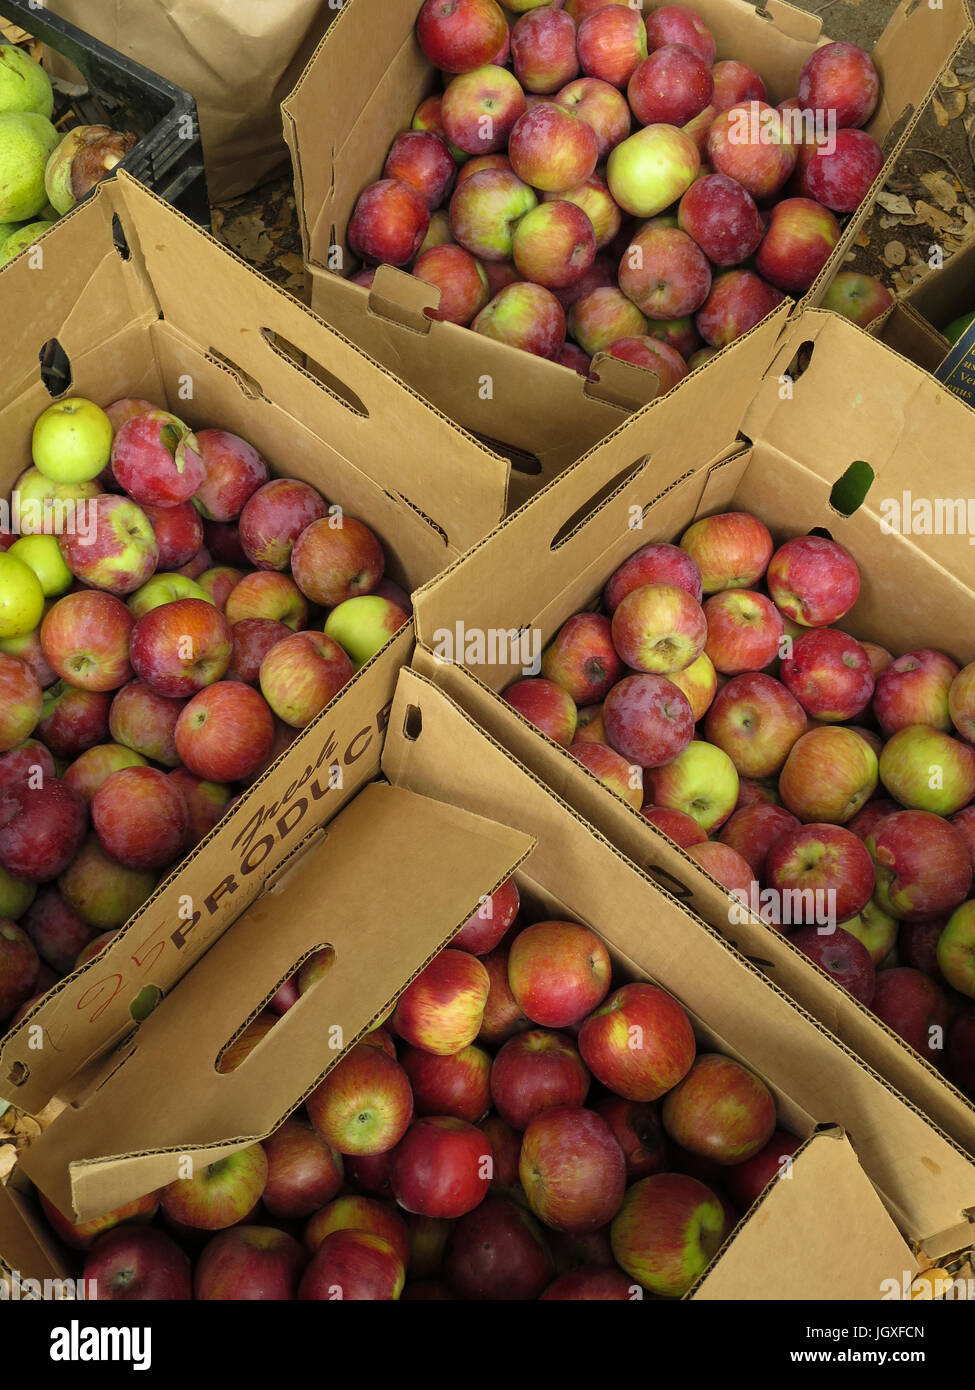 Boxes of local apples used to make cider with old-fashioned cider presses during the Apple Festival in Palomar Mountain State Park in the fall. Stock Photo